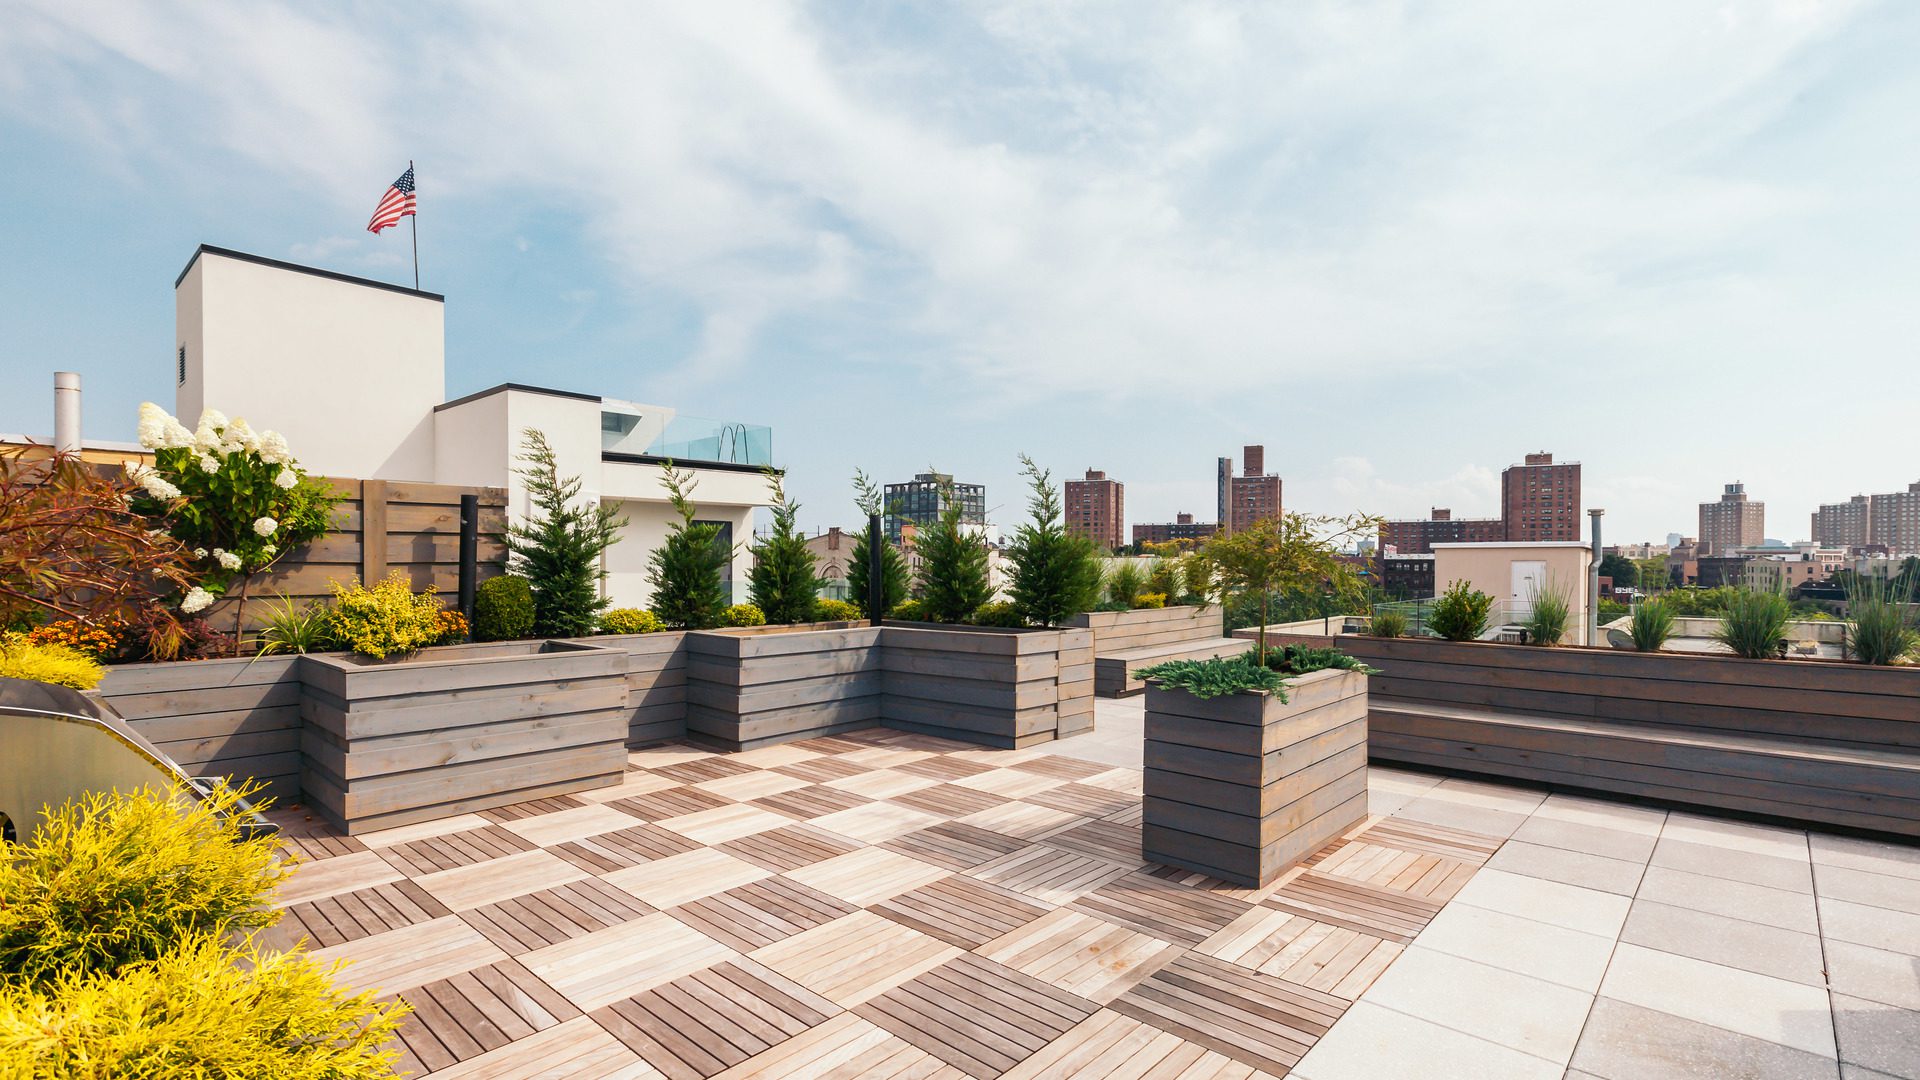 A rooftop garden with wooden planters and checkered tiles.